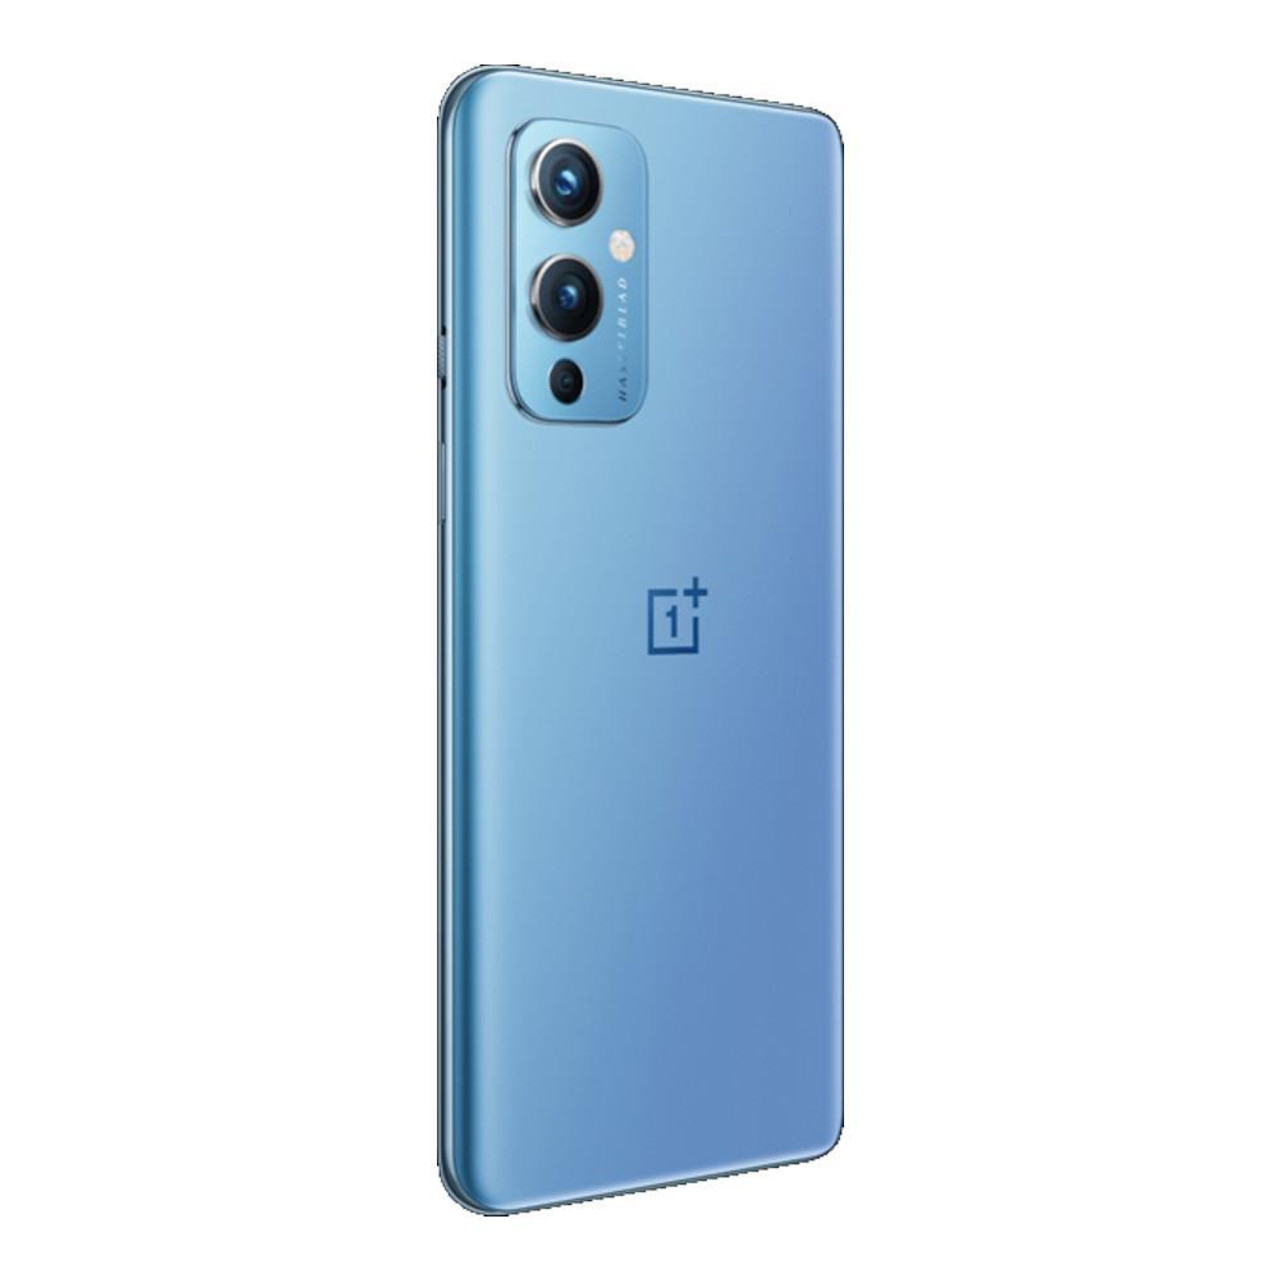 OnePlus 9 review: Super-fast charging, Hasselblad software, 120Hz display